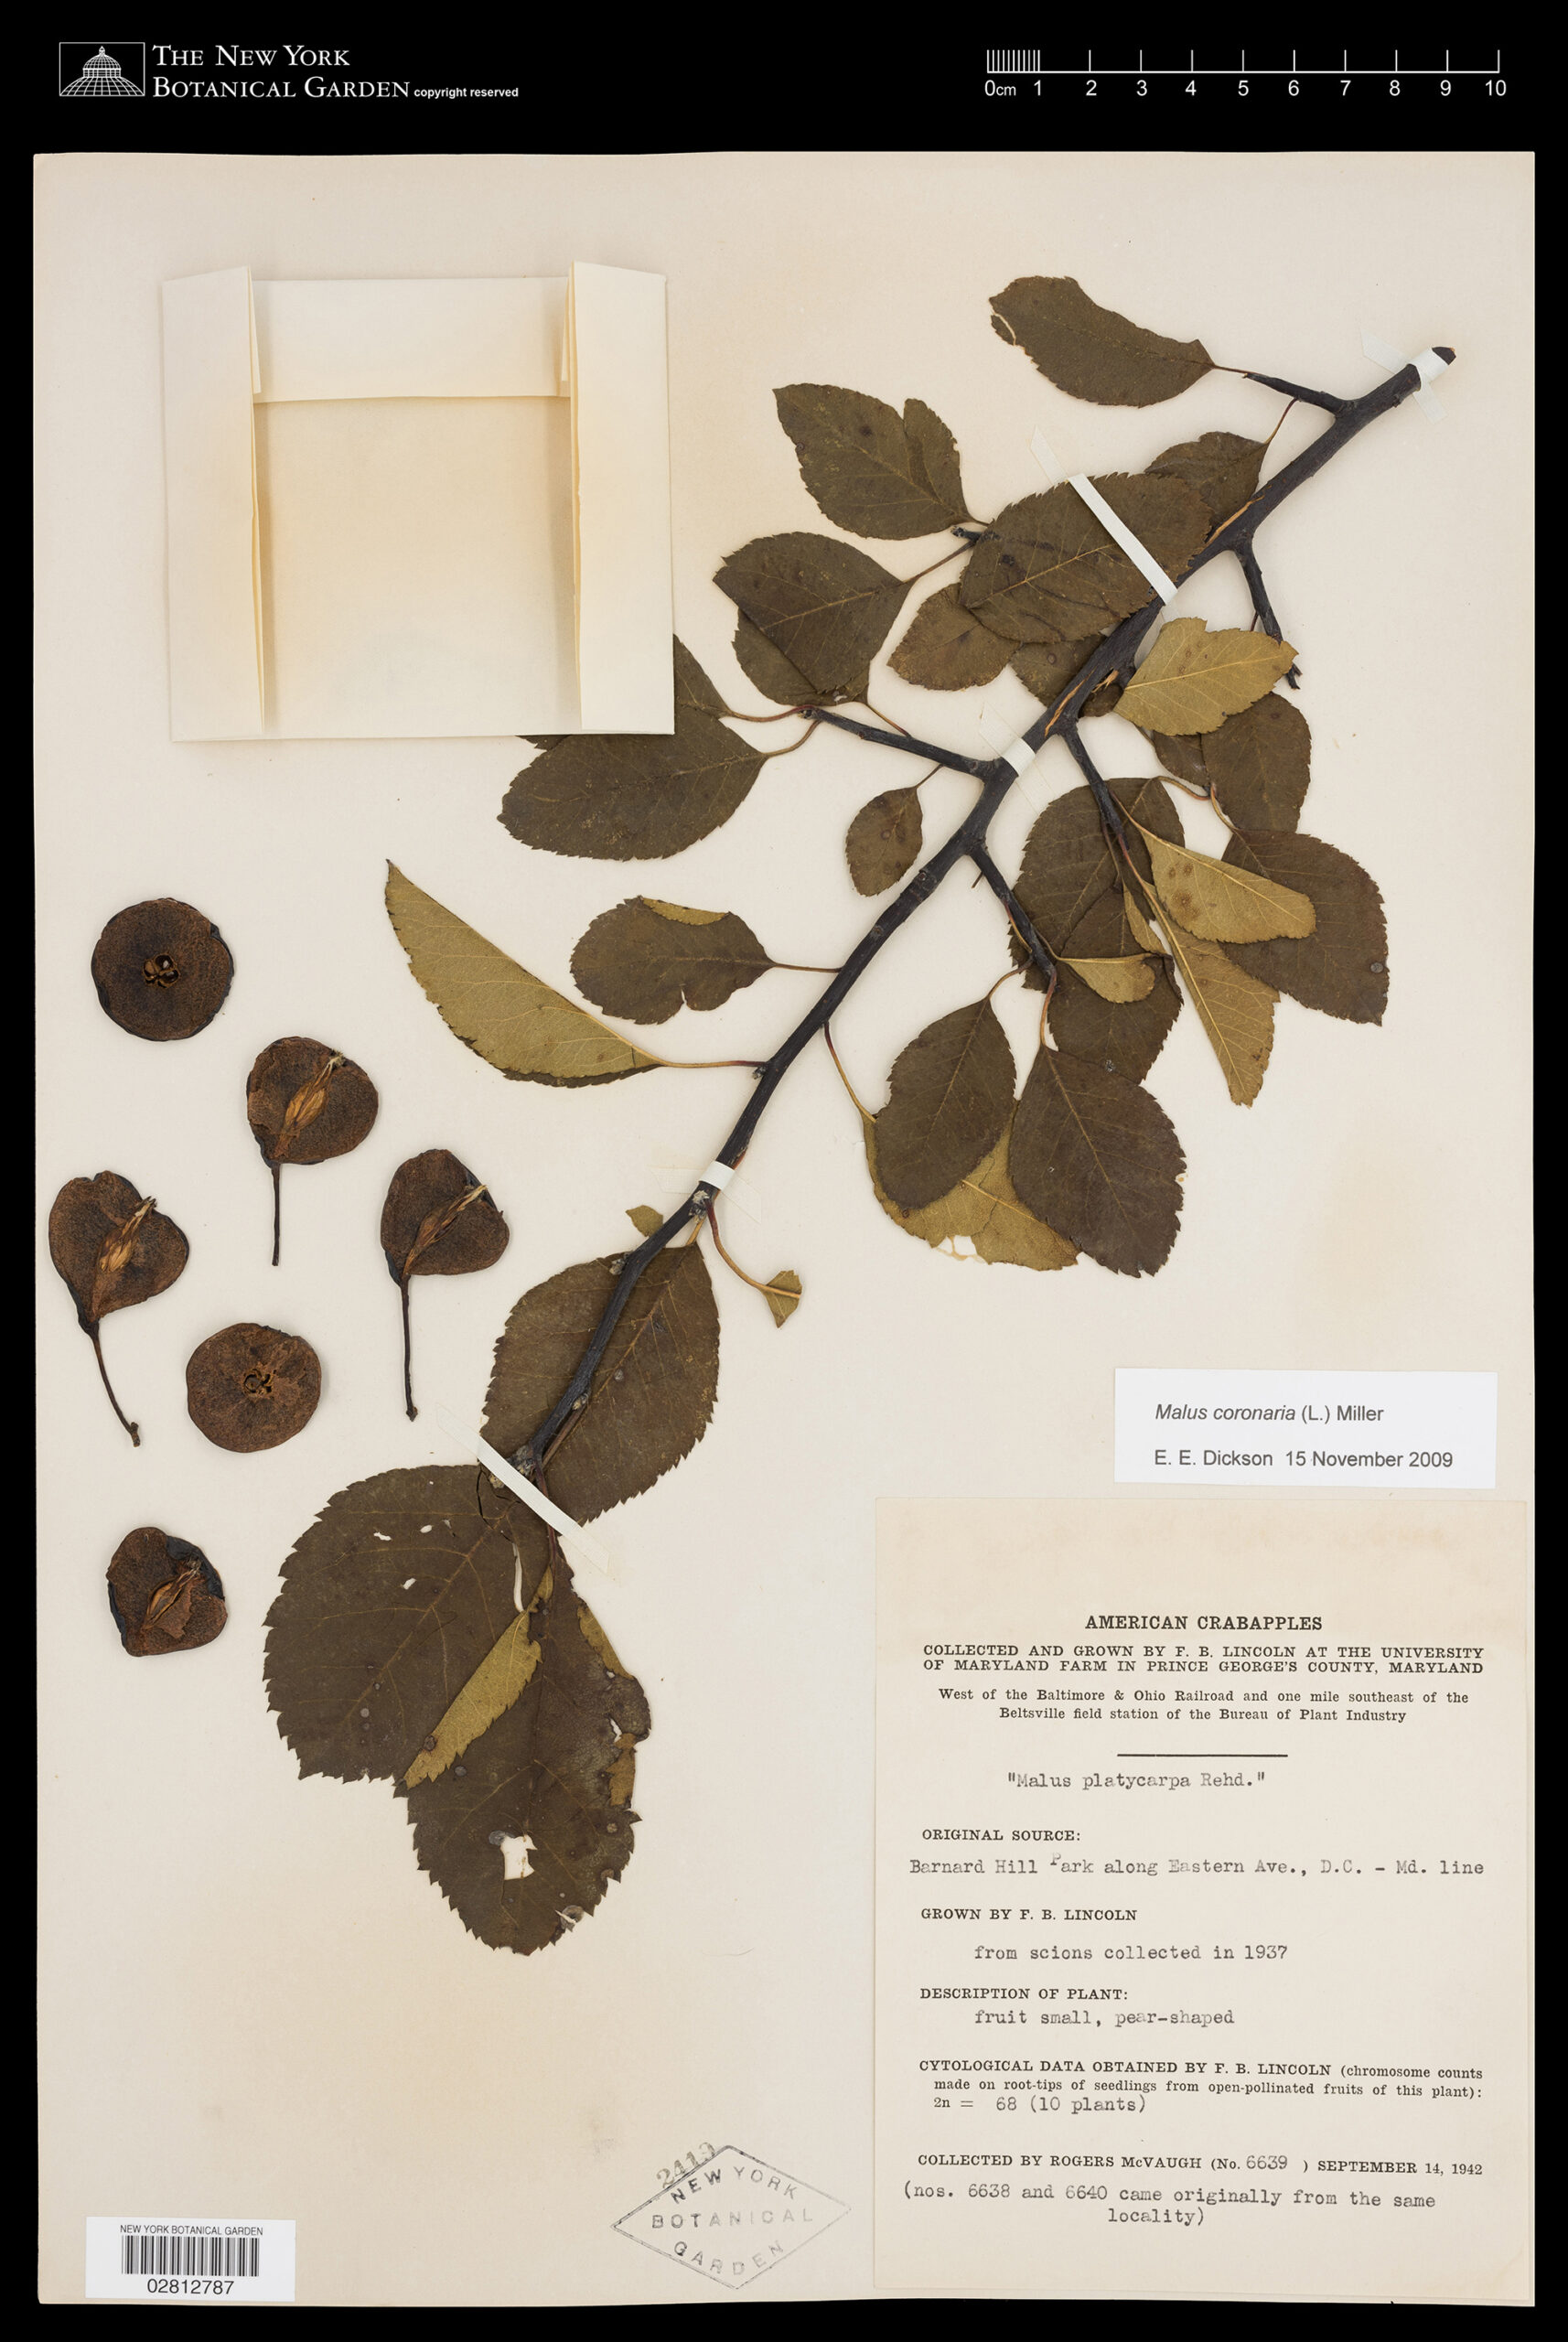 An image of a dried specimen of a crabapple branch, with leaves still intact and petals laid out on the side.